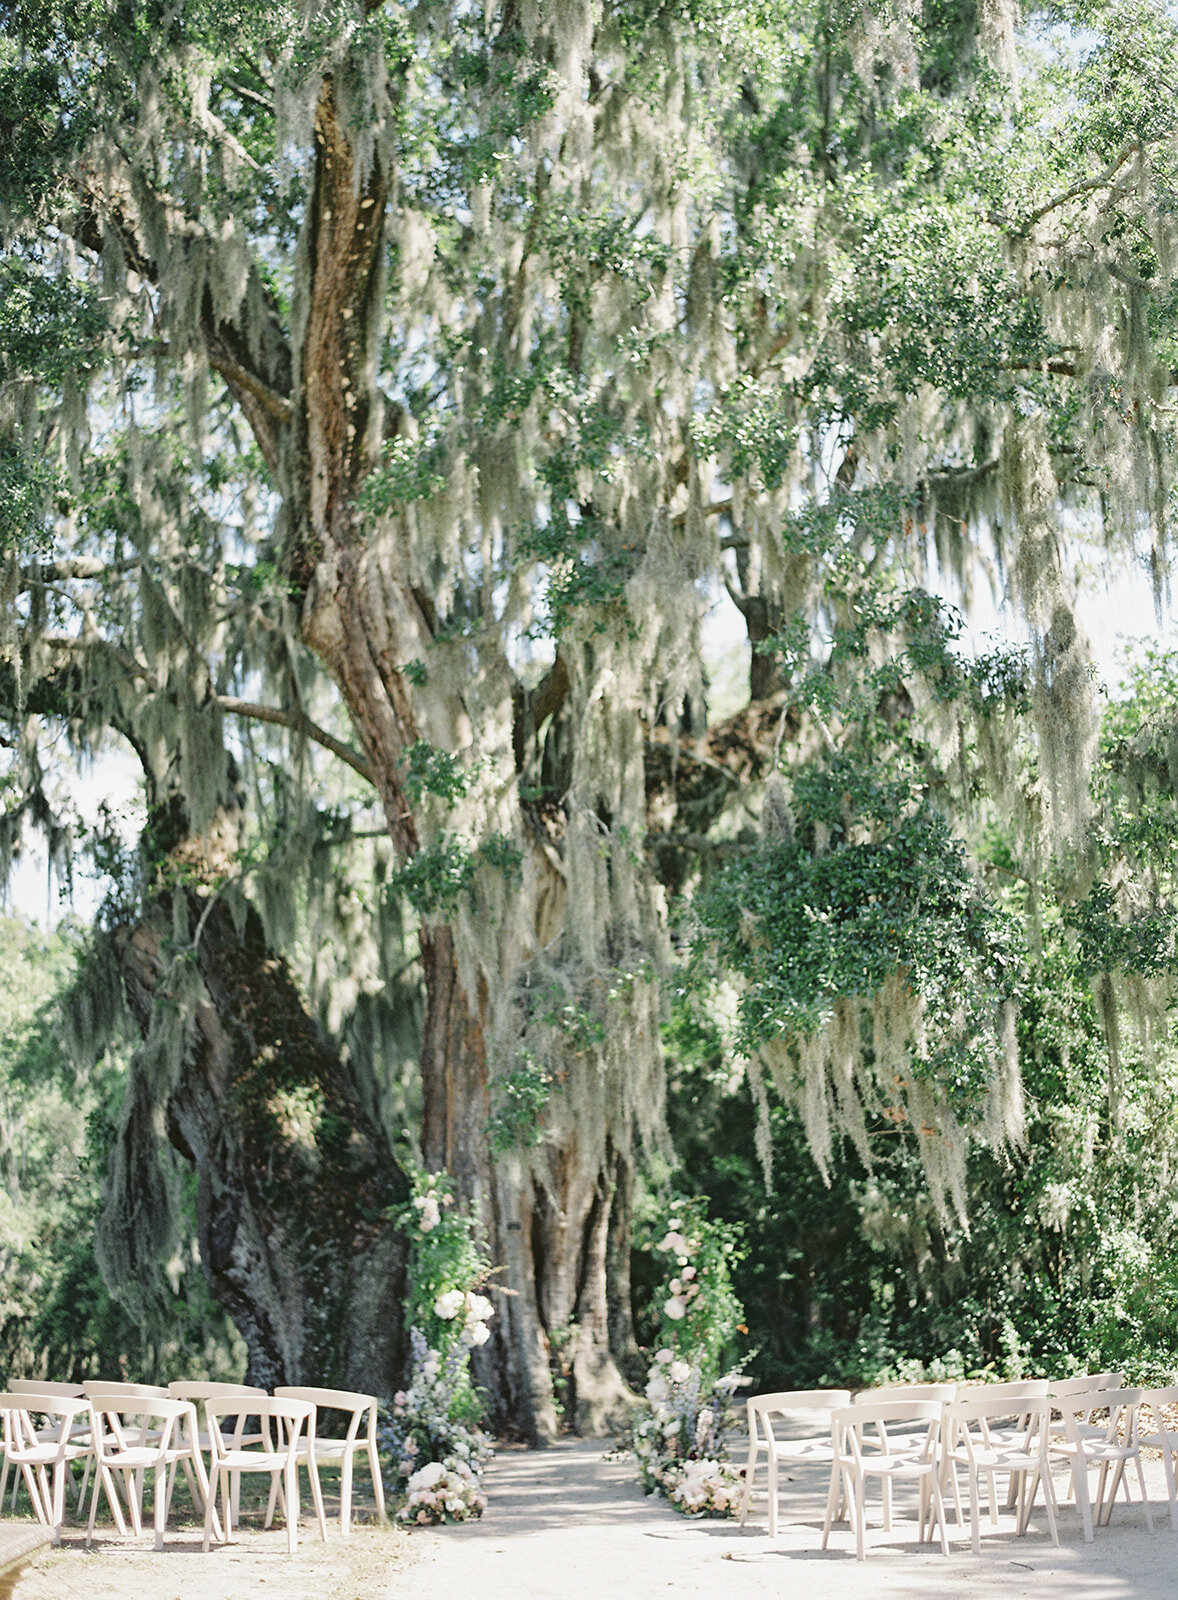 Ceremony site under large oak tree at Middleton Place. Ceremony chairs are modern cream chairs on either side of the aisle. Floral arrangements go down the whole aisle up to two tall towers of floral installations at the front. Photographed by wedding photographers in Charleston Amy Mulder Photography